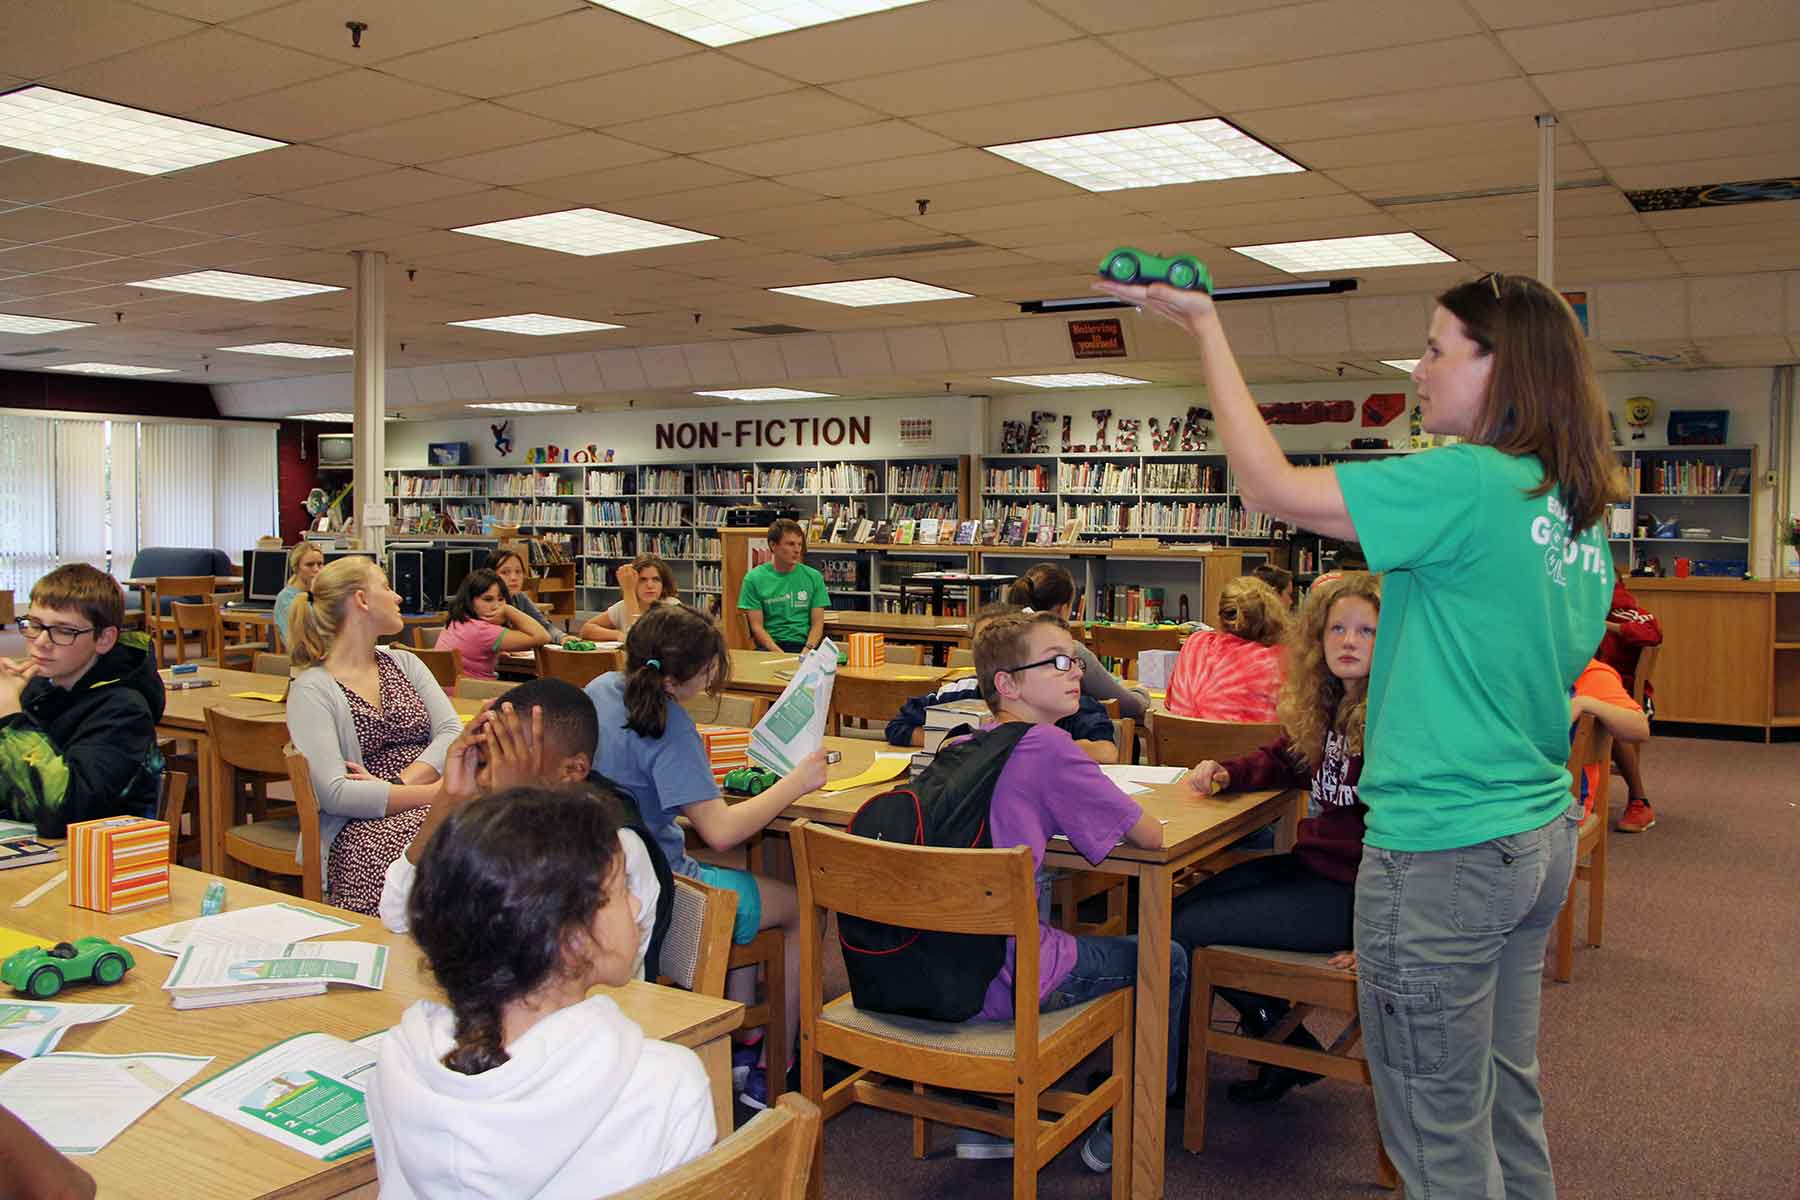 Jen Robertson-Honecker demonstrates STEM principles with a race car, showing students seated in a library.